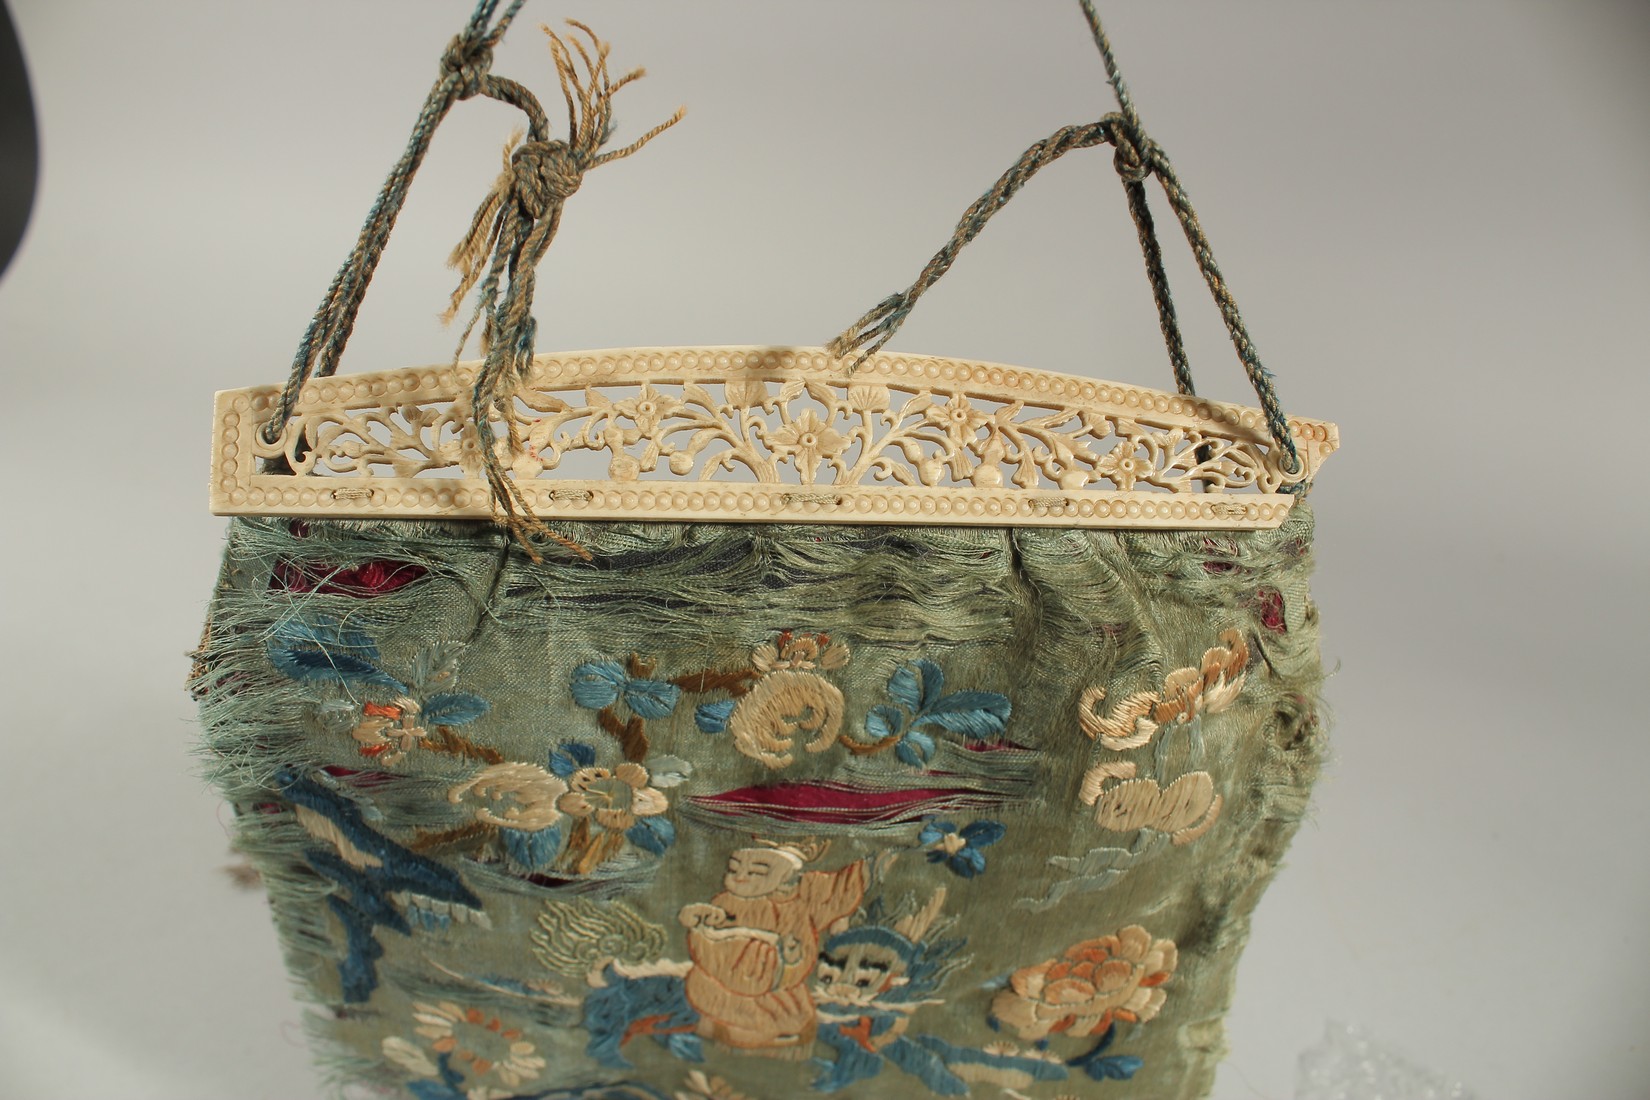 A CHINESE EMBROIDERED SILK PURSE WITH PIERCED BONE HANDLES. - Image 4 of 4